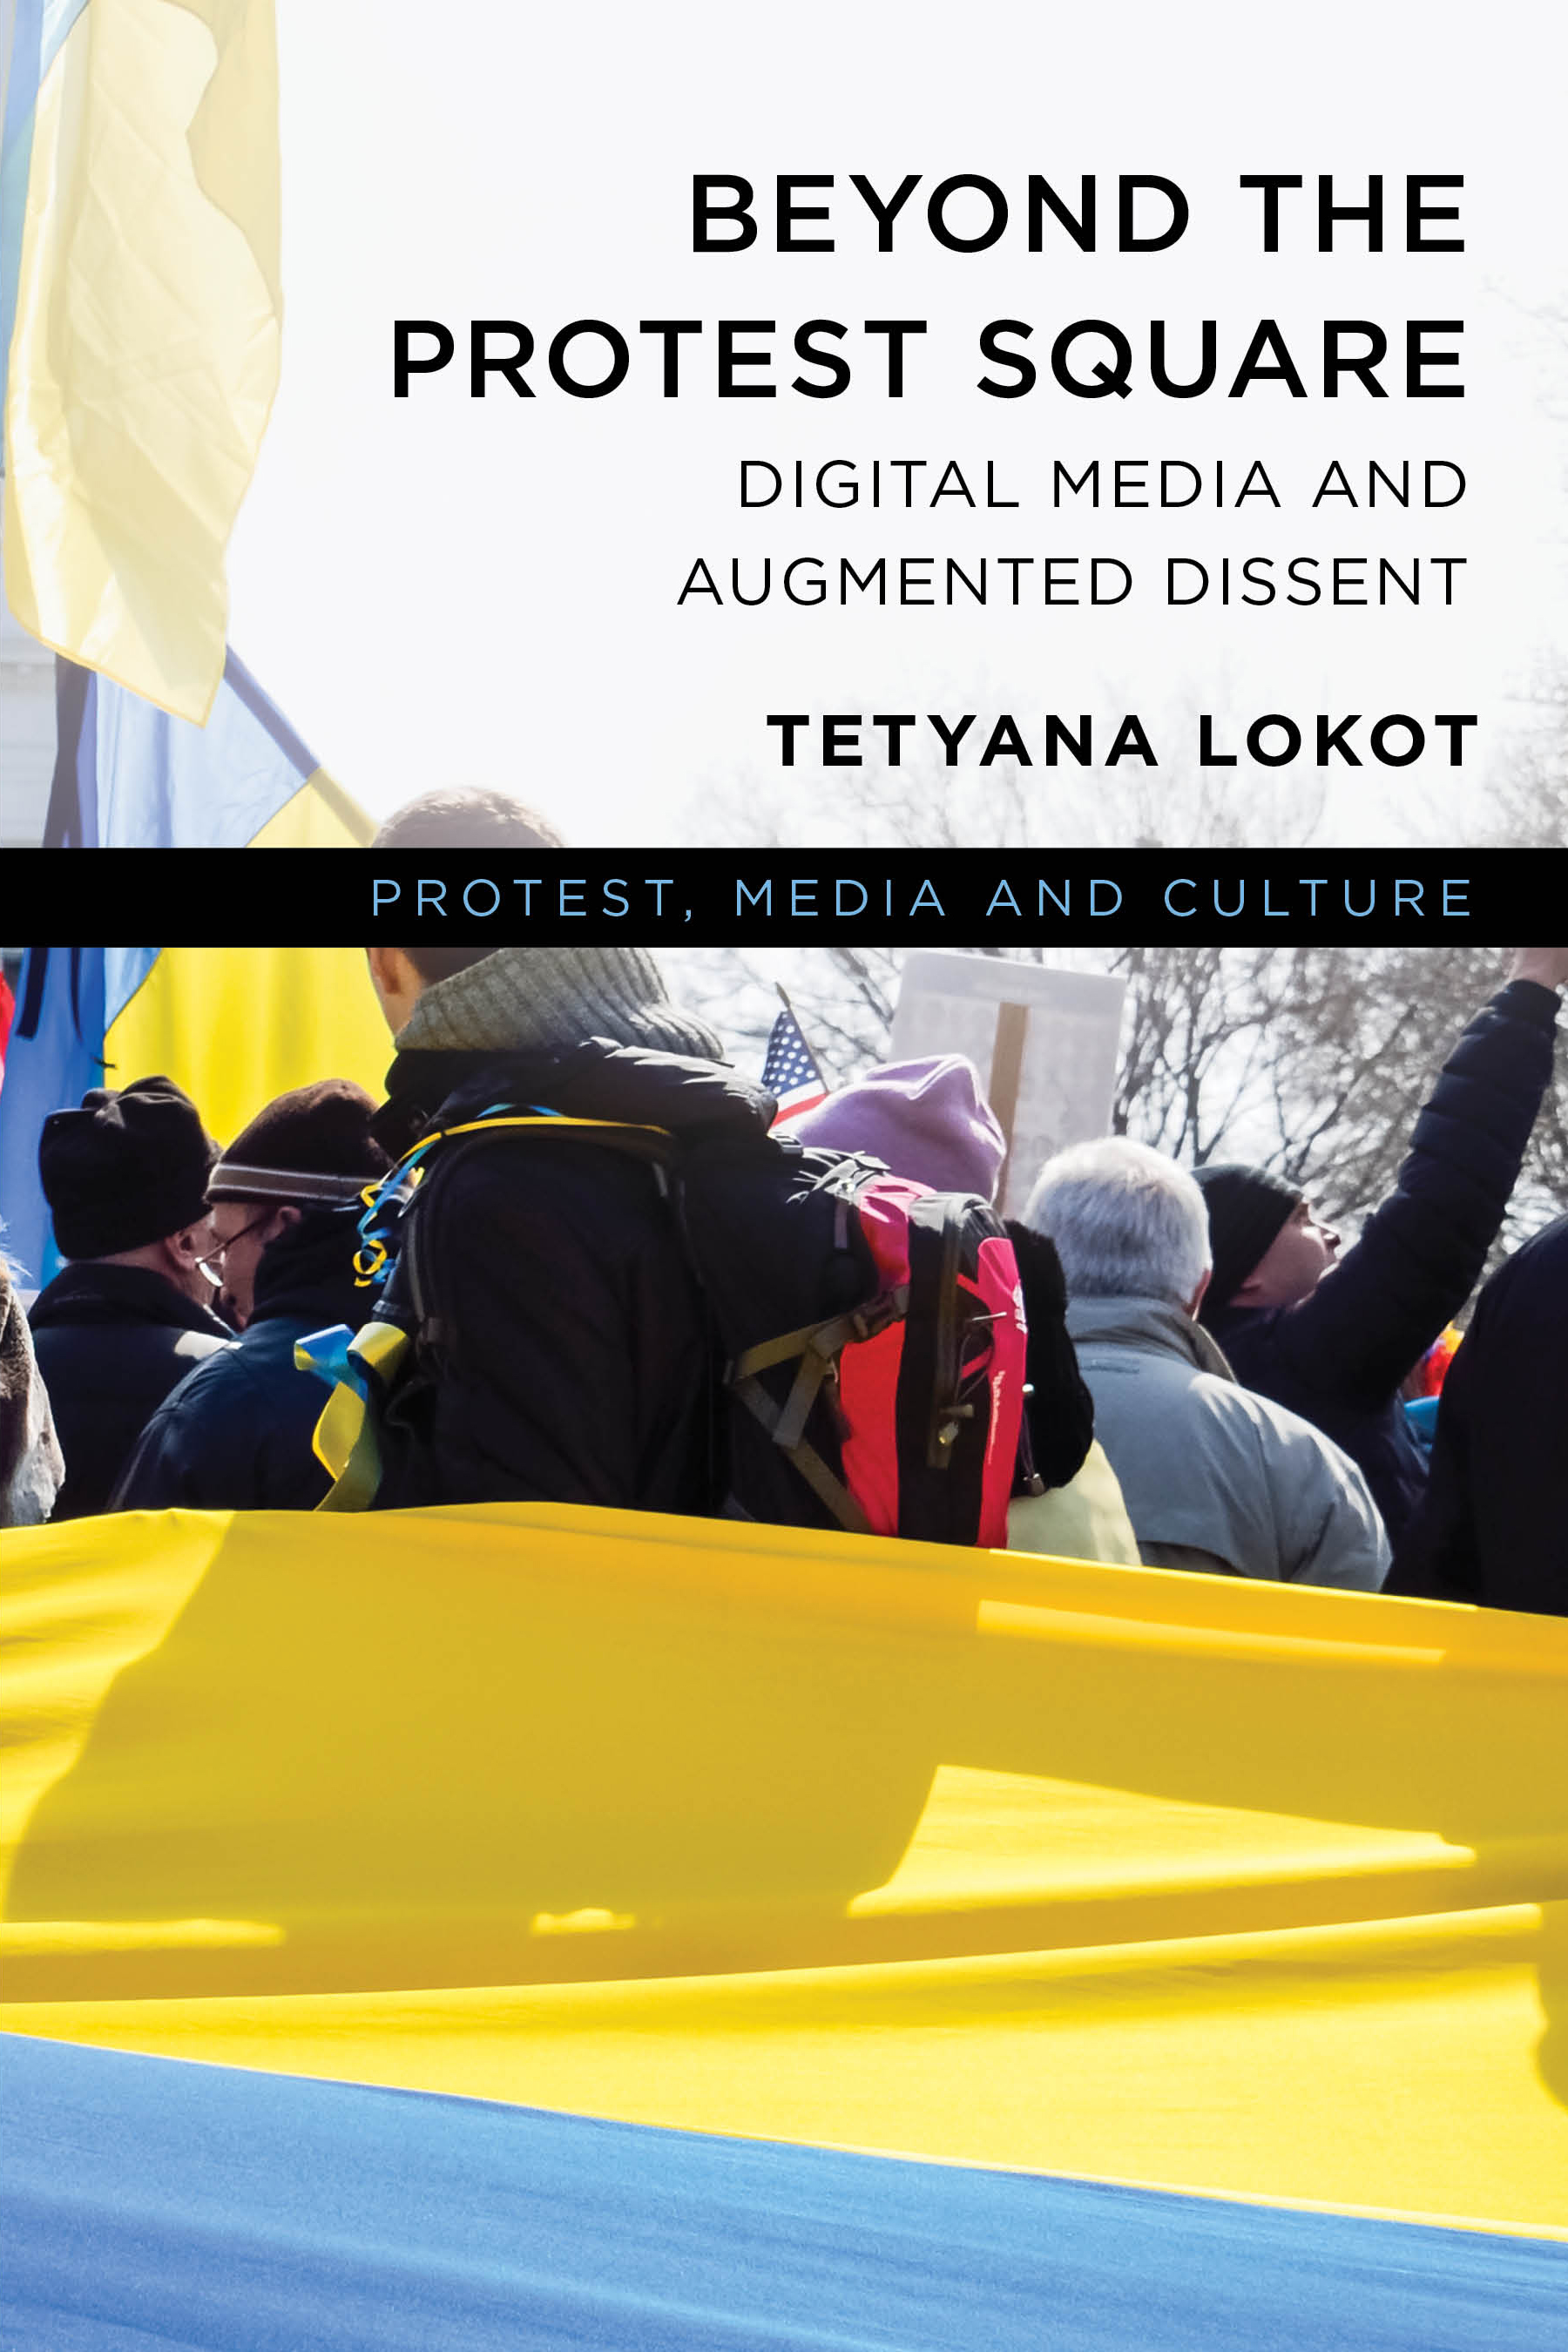 Beyond the Protest Square: Digital Media and Augmented Dissent